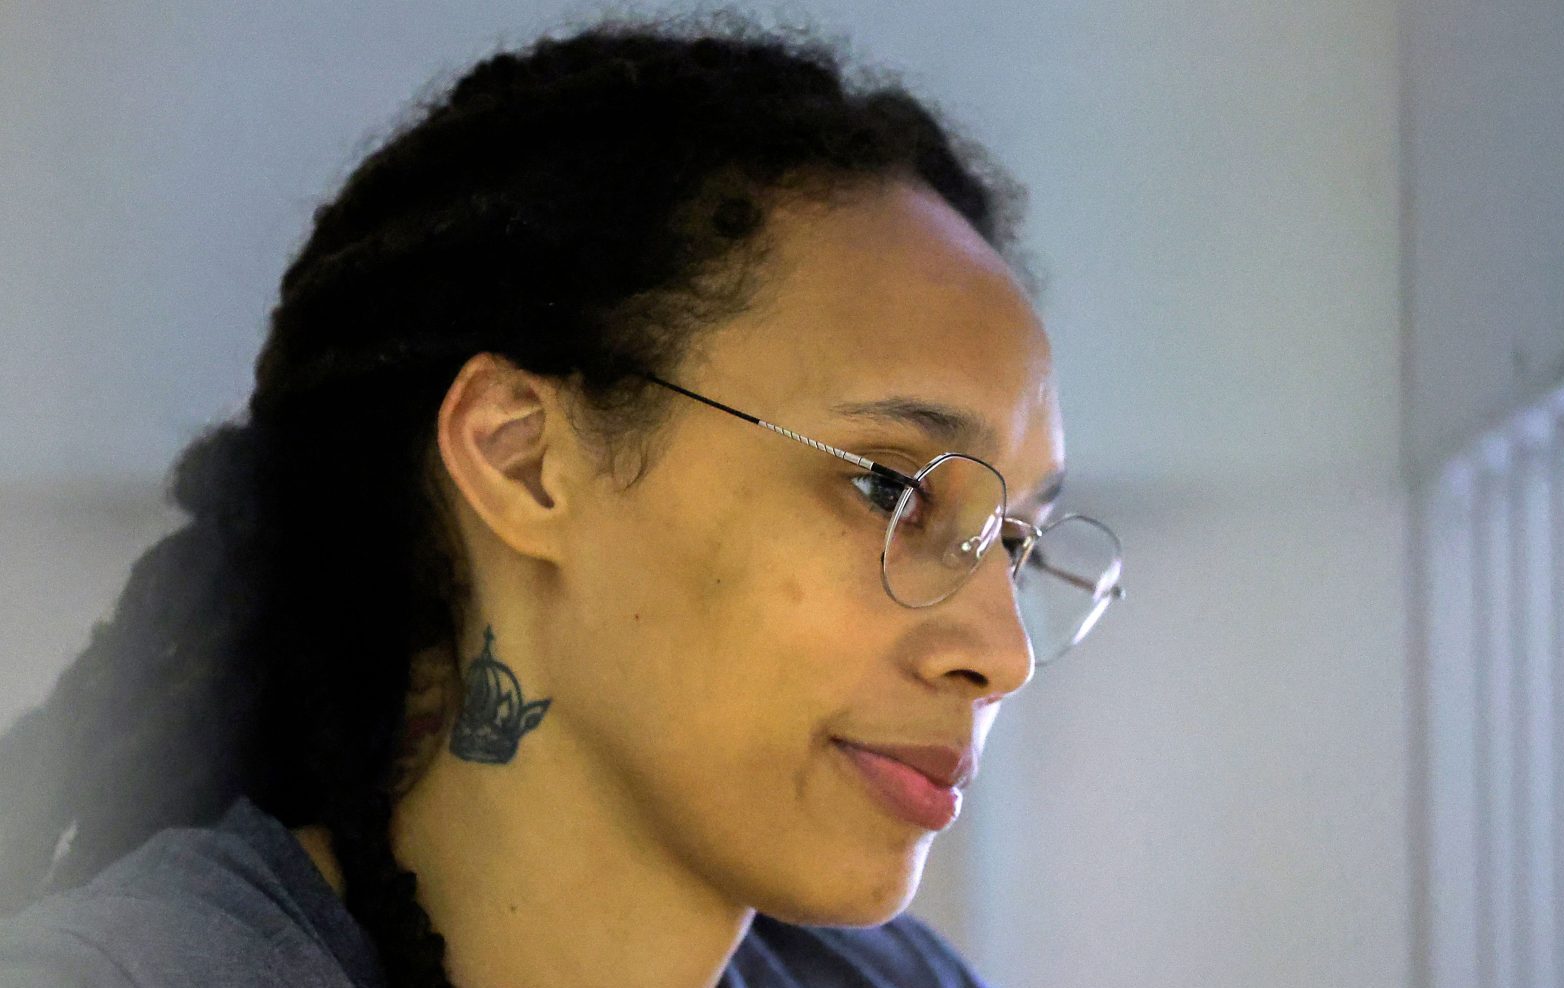 Brittney Griner’s Lawyer Reveals Details About Her Detainment: “She Has Not Been In As Good Condition”